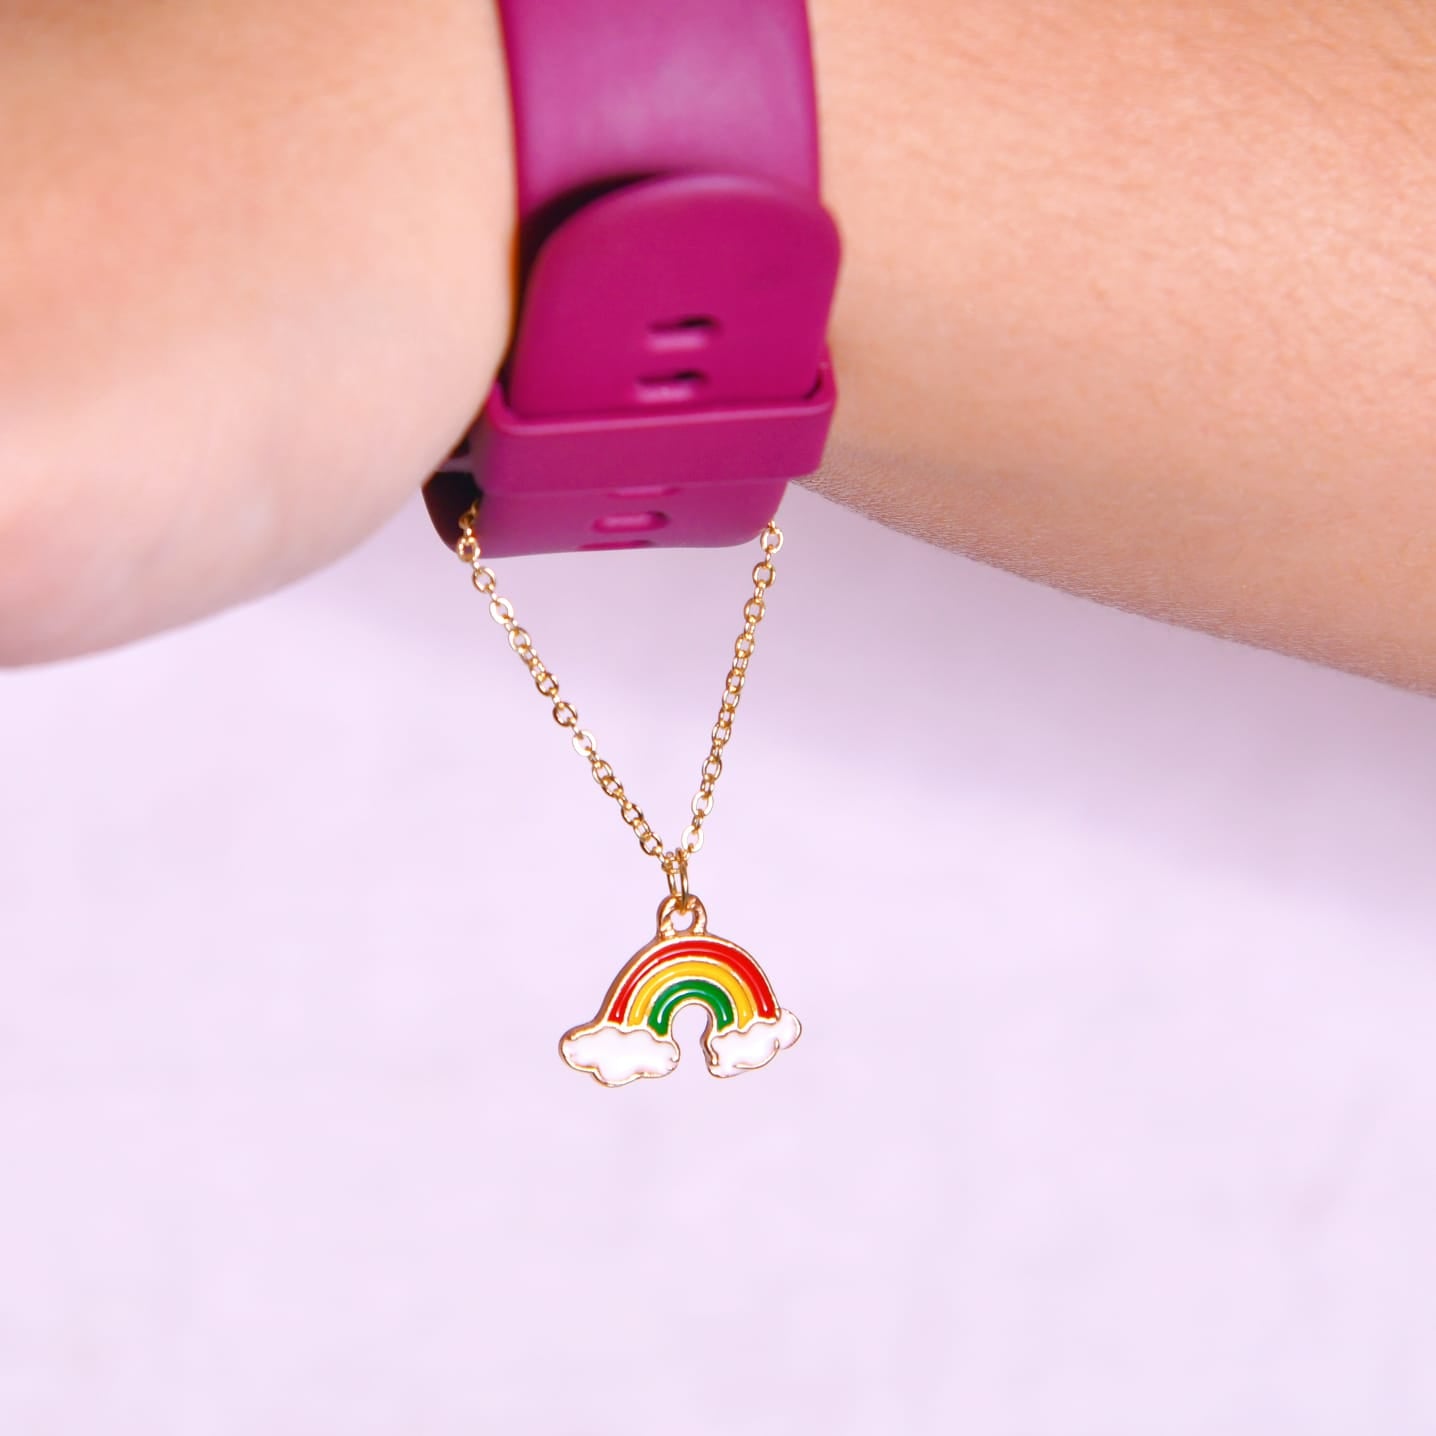 Chase the Rainbow watch charm